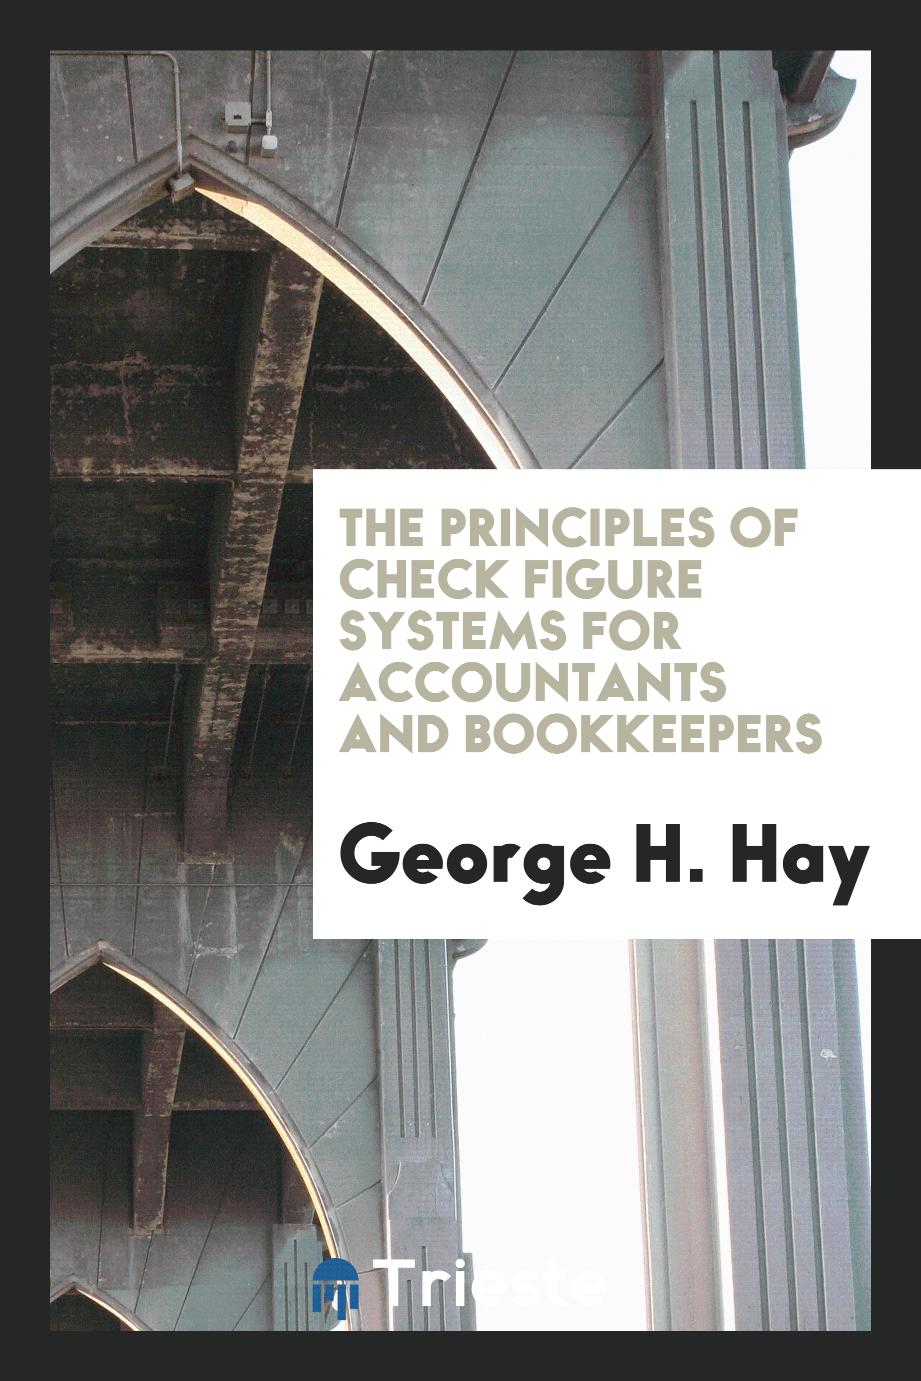 The Principles of Check Figure Systems for Accountants and Bookkeepers